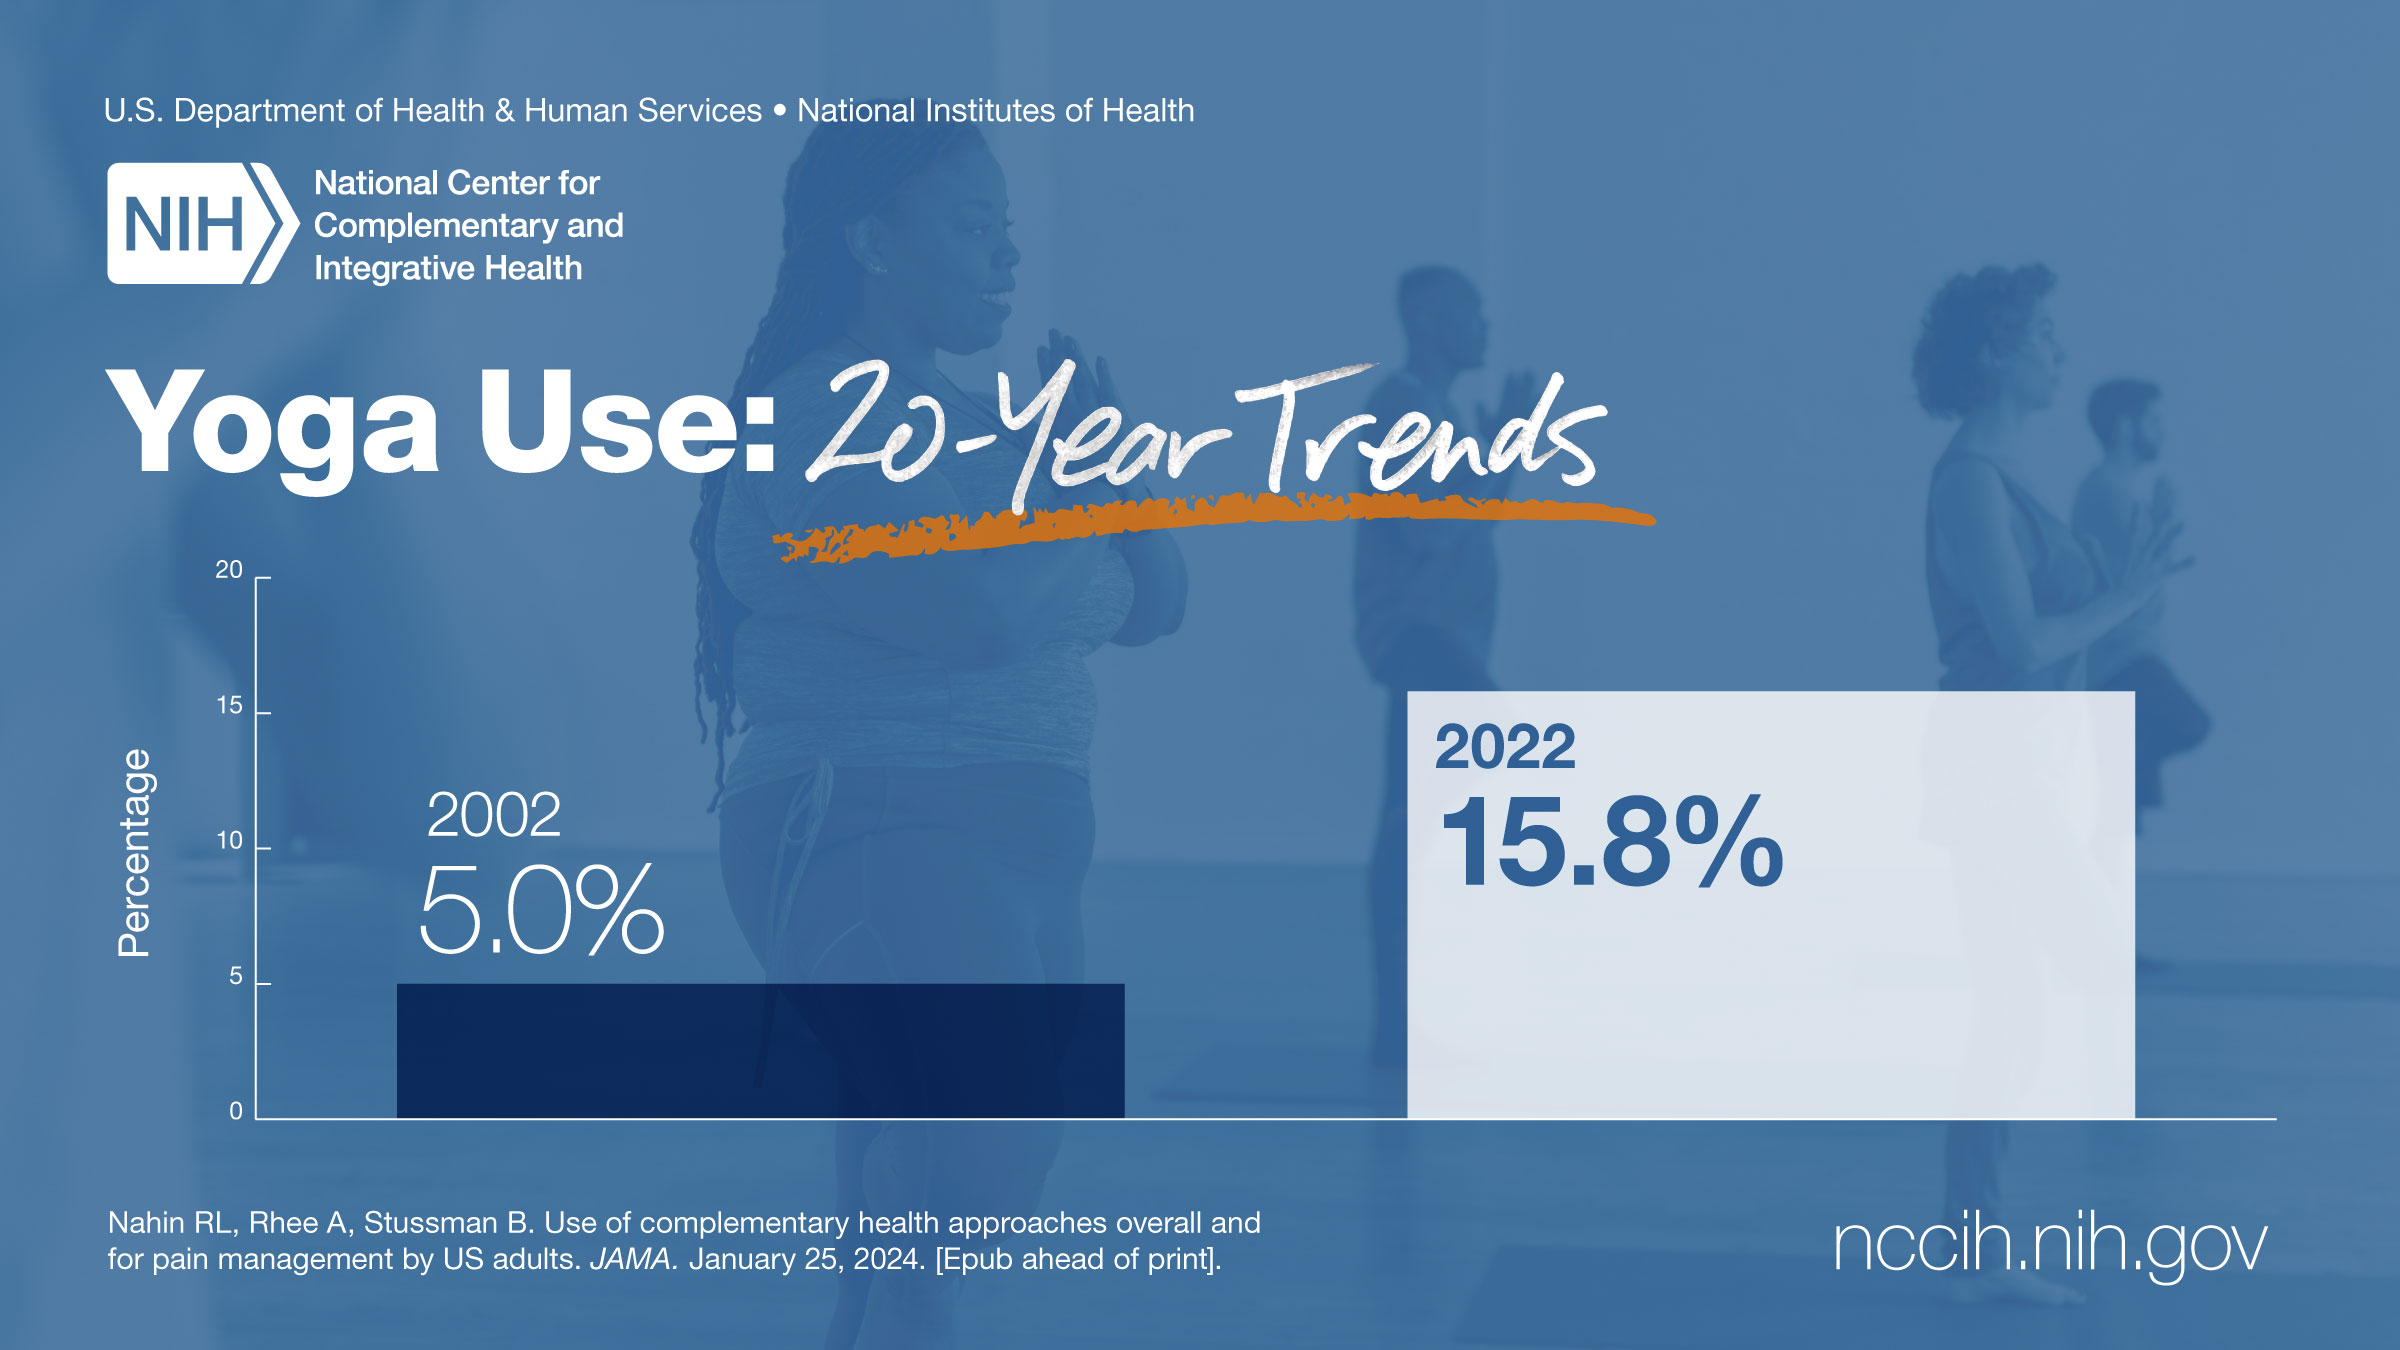 NHIS 20 Year Trends: Use of Yoga